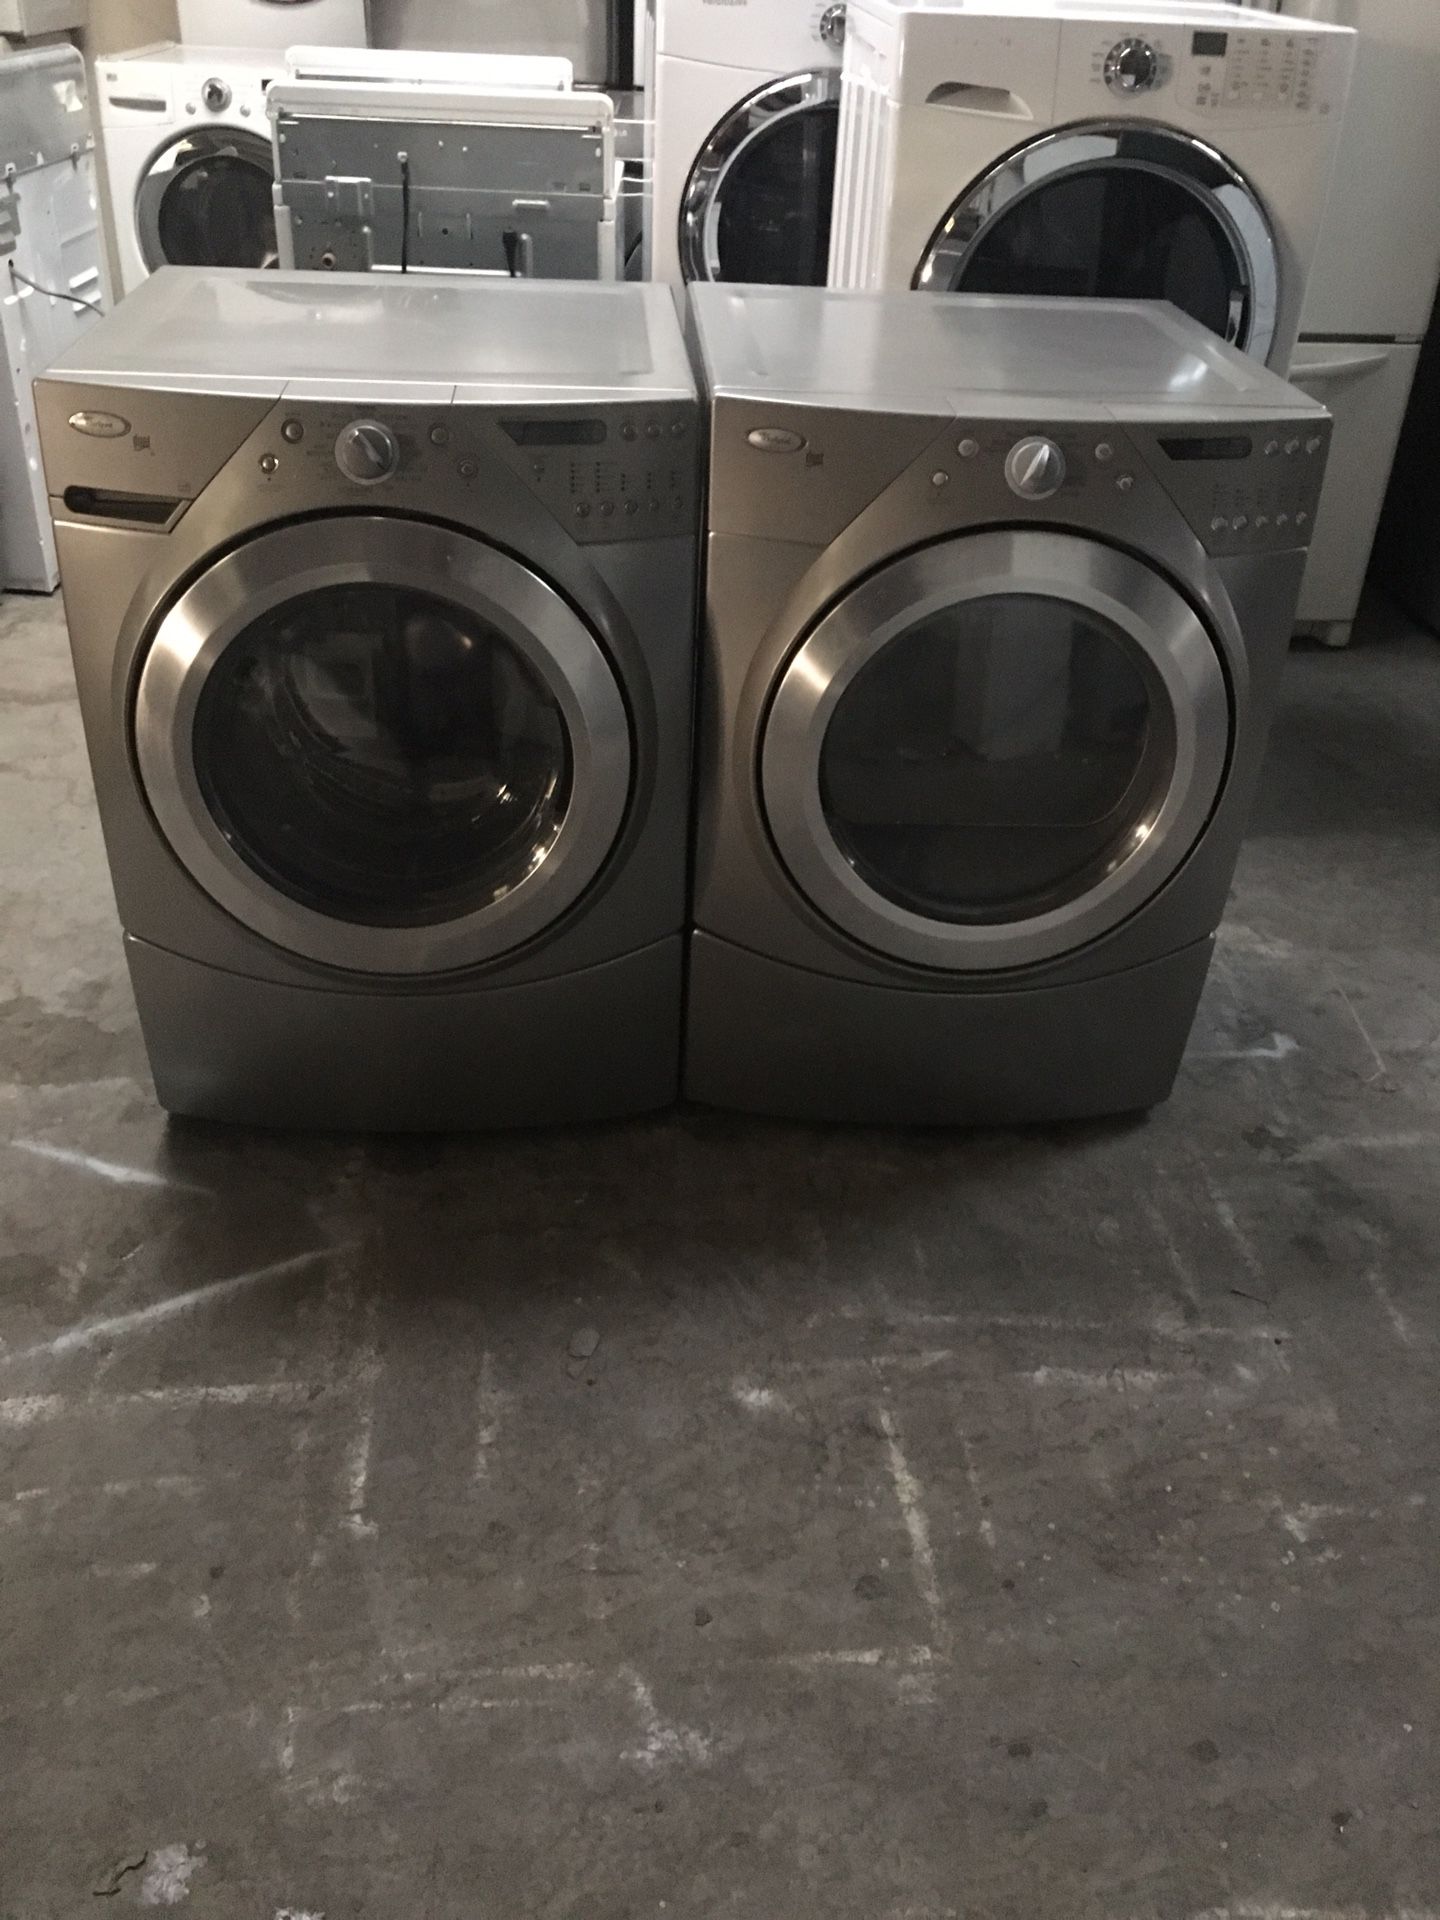 Set washer and dryer brand whirlpool electric dryer everything is good working condition 90 days warranty delivery and installation